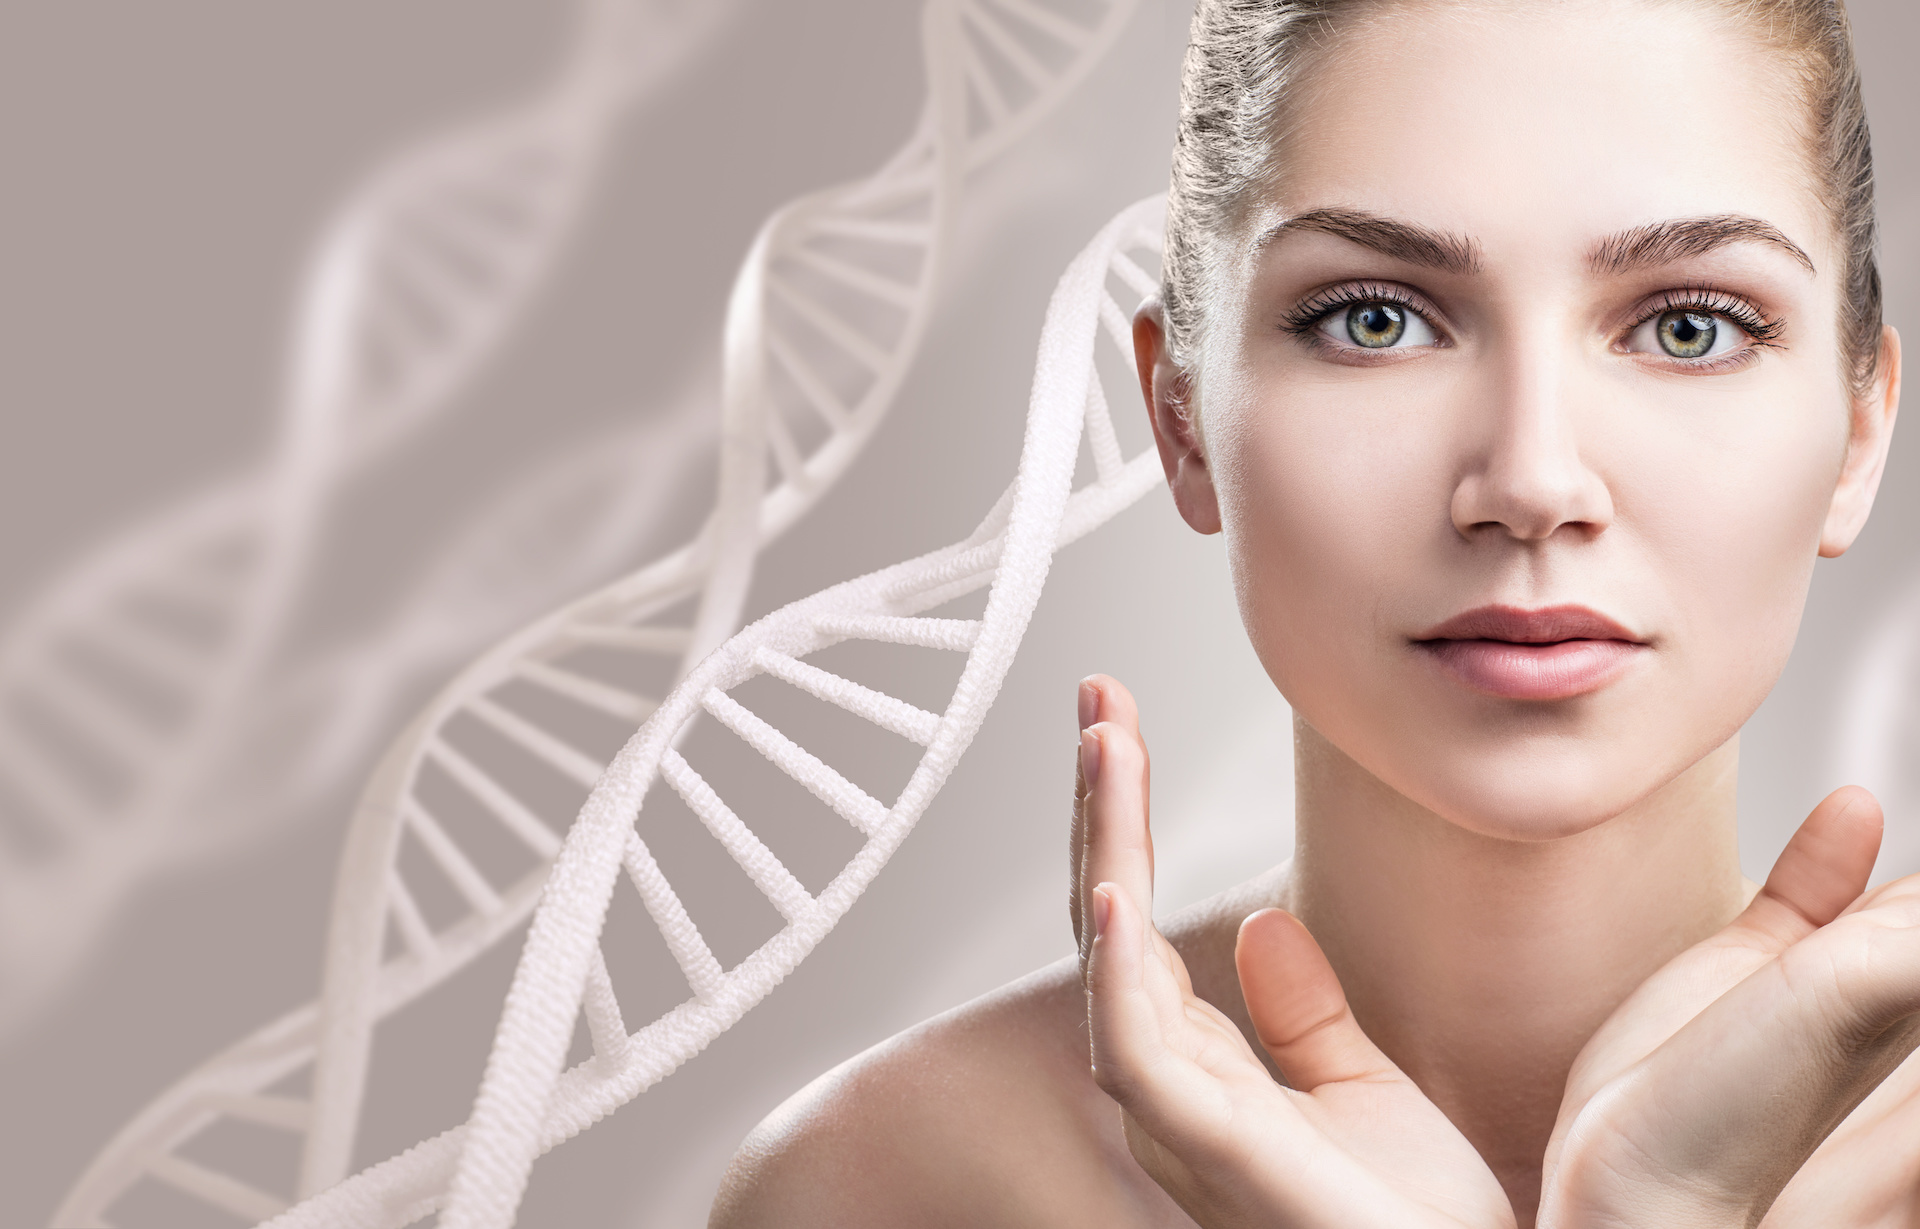 Hyaluronic Acid vs. Biostimulatory Fillers: Which is Best for Me?